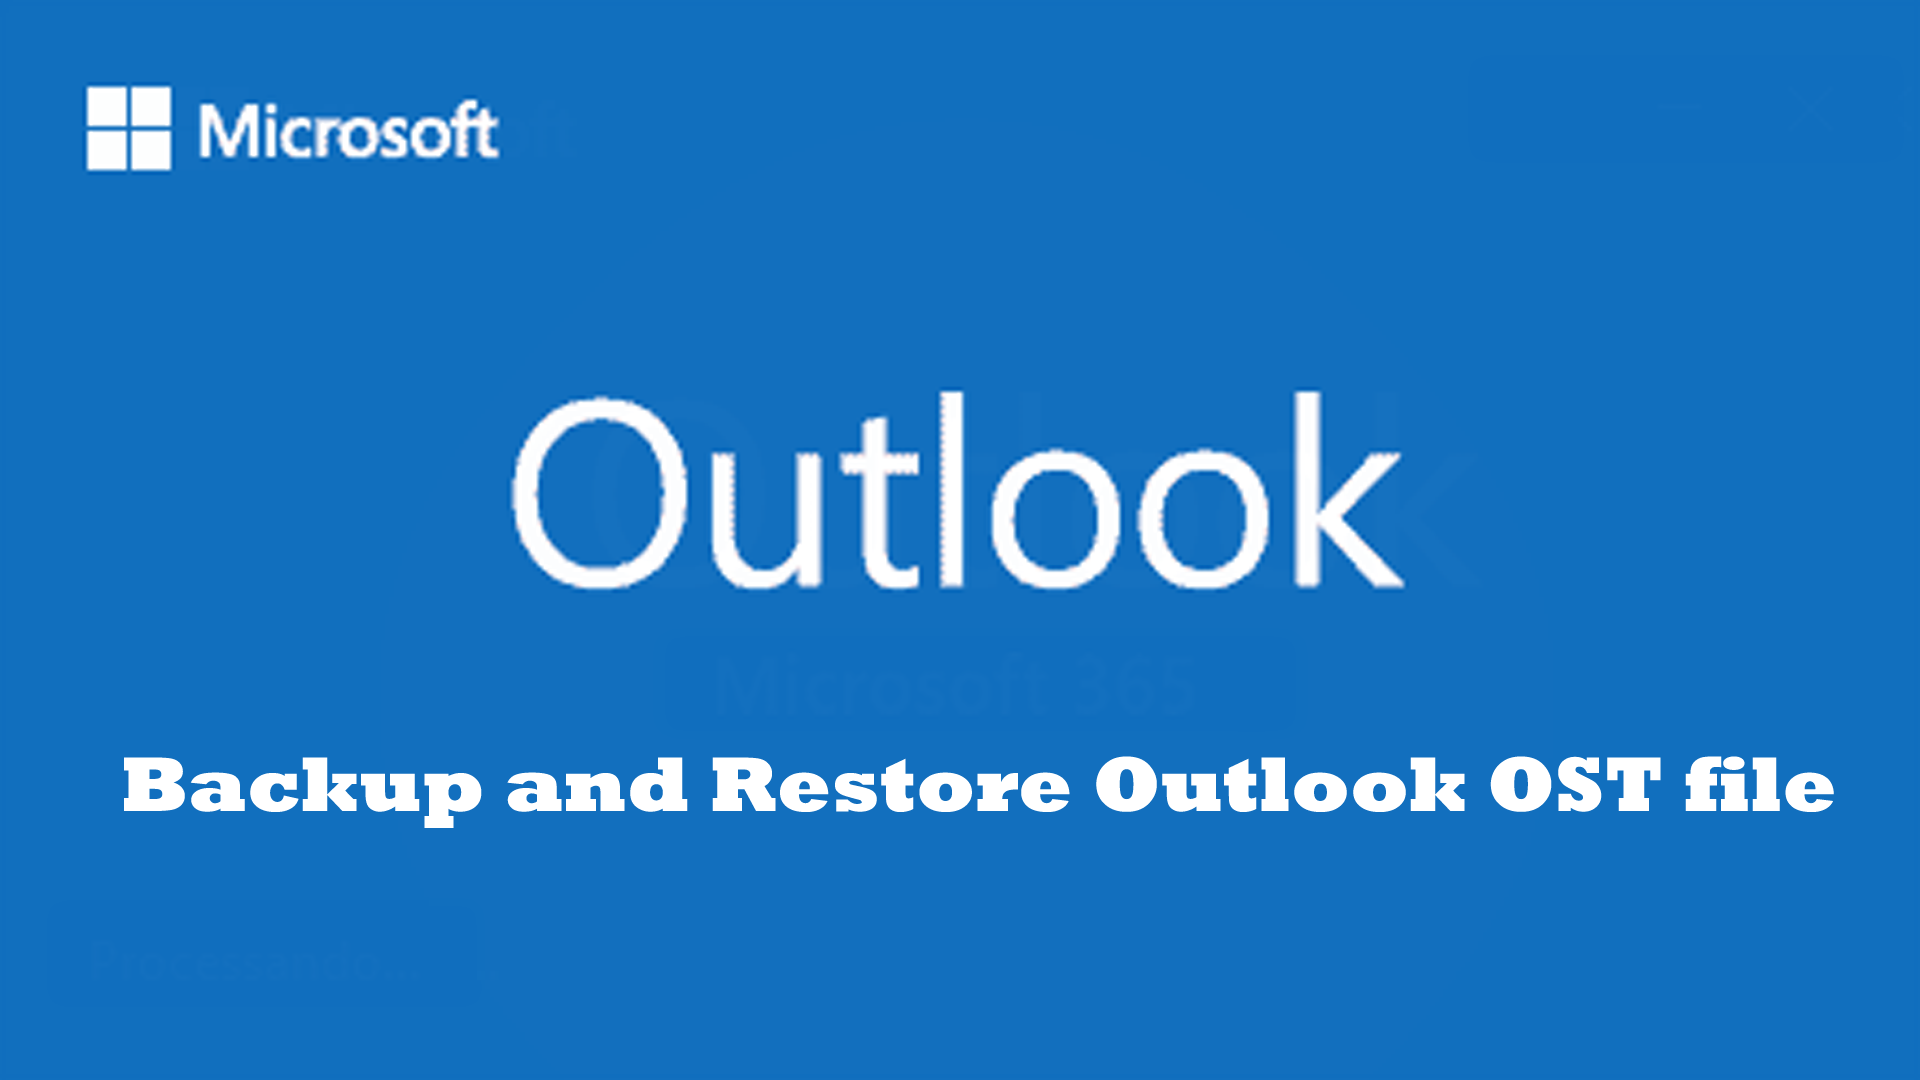 How to Backup and Restore Outlook OST File?